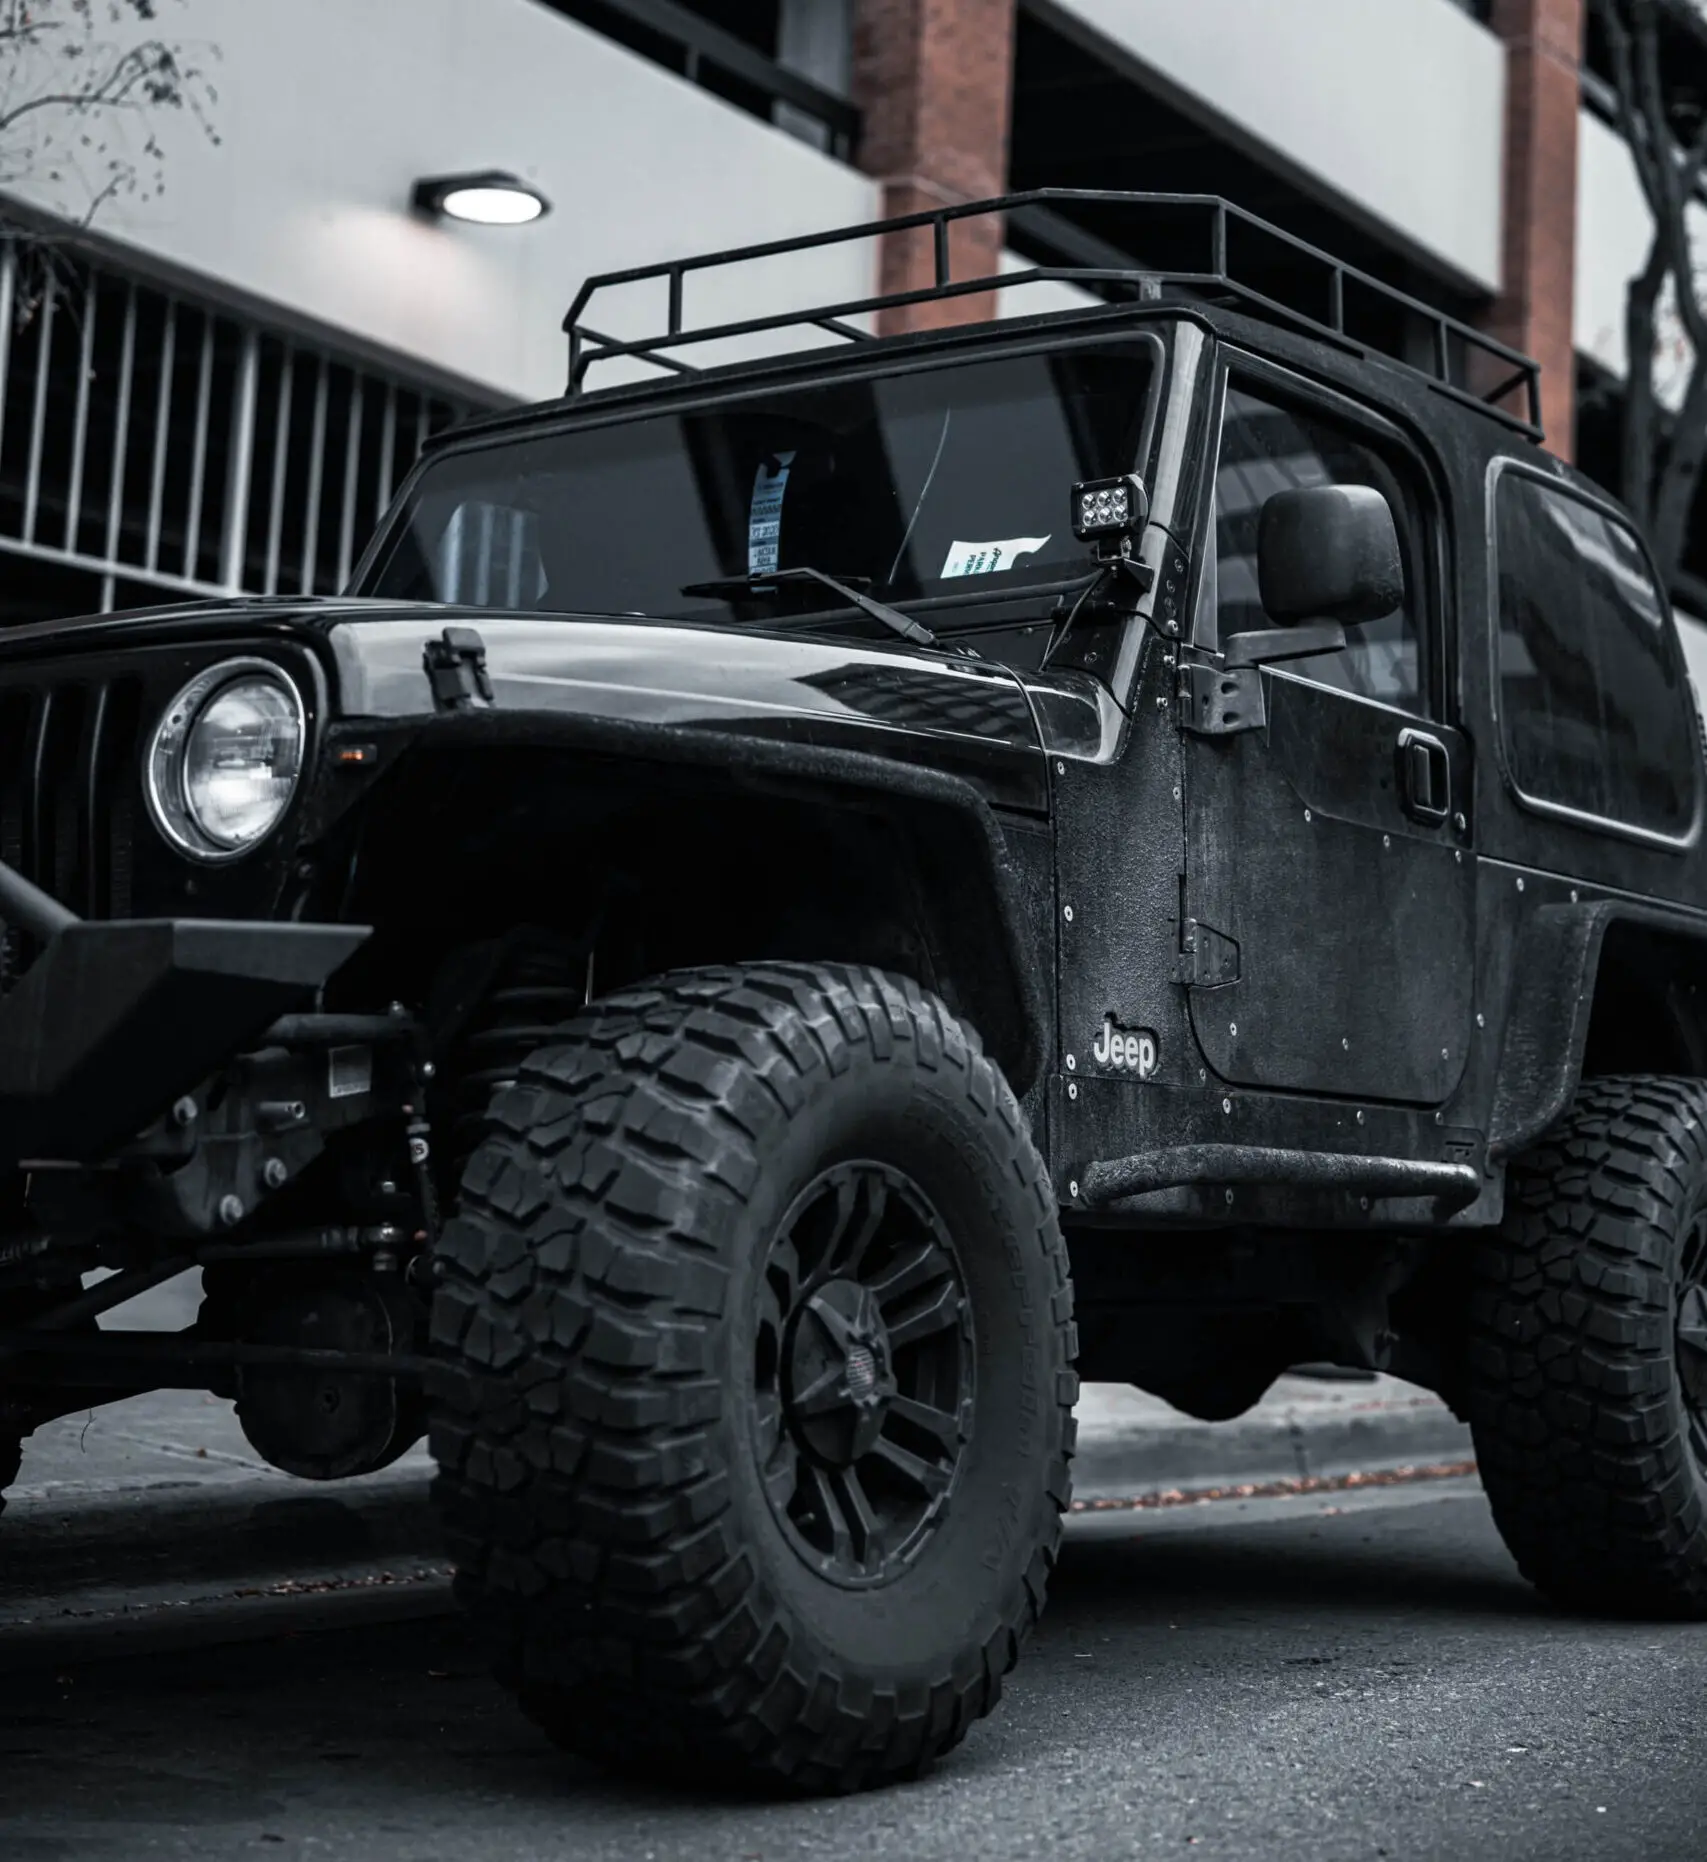 Read more about the article Do Lift Kits Add Value? | Let’s find Out